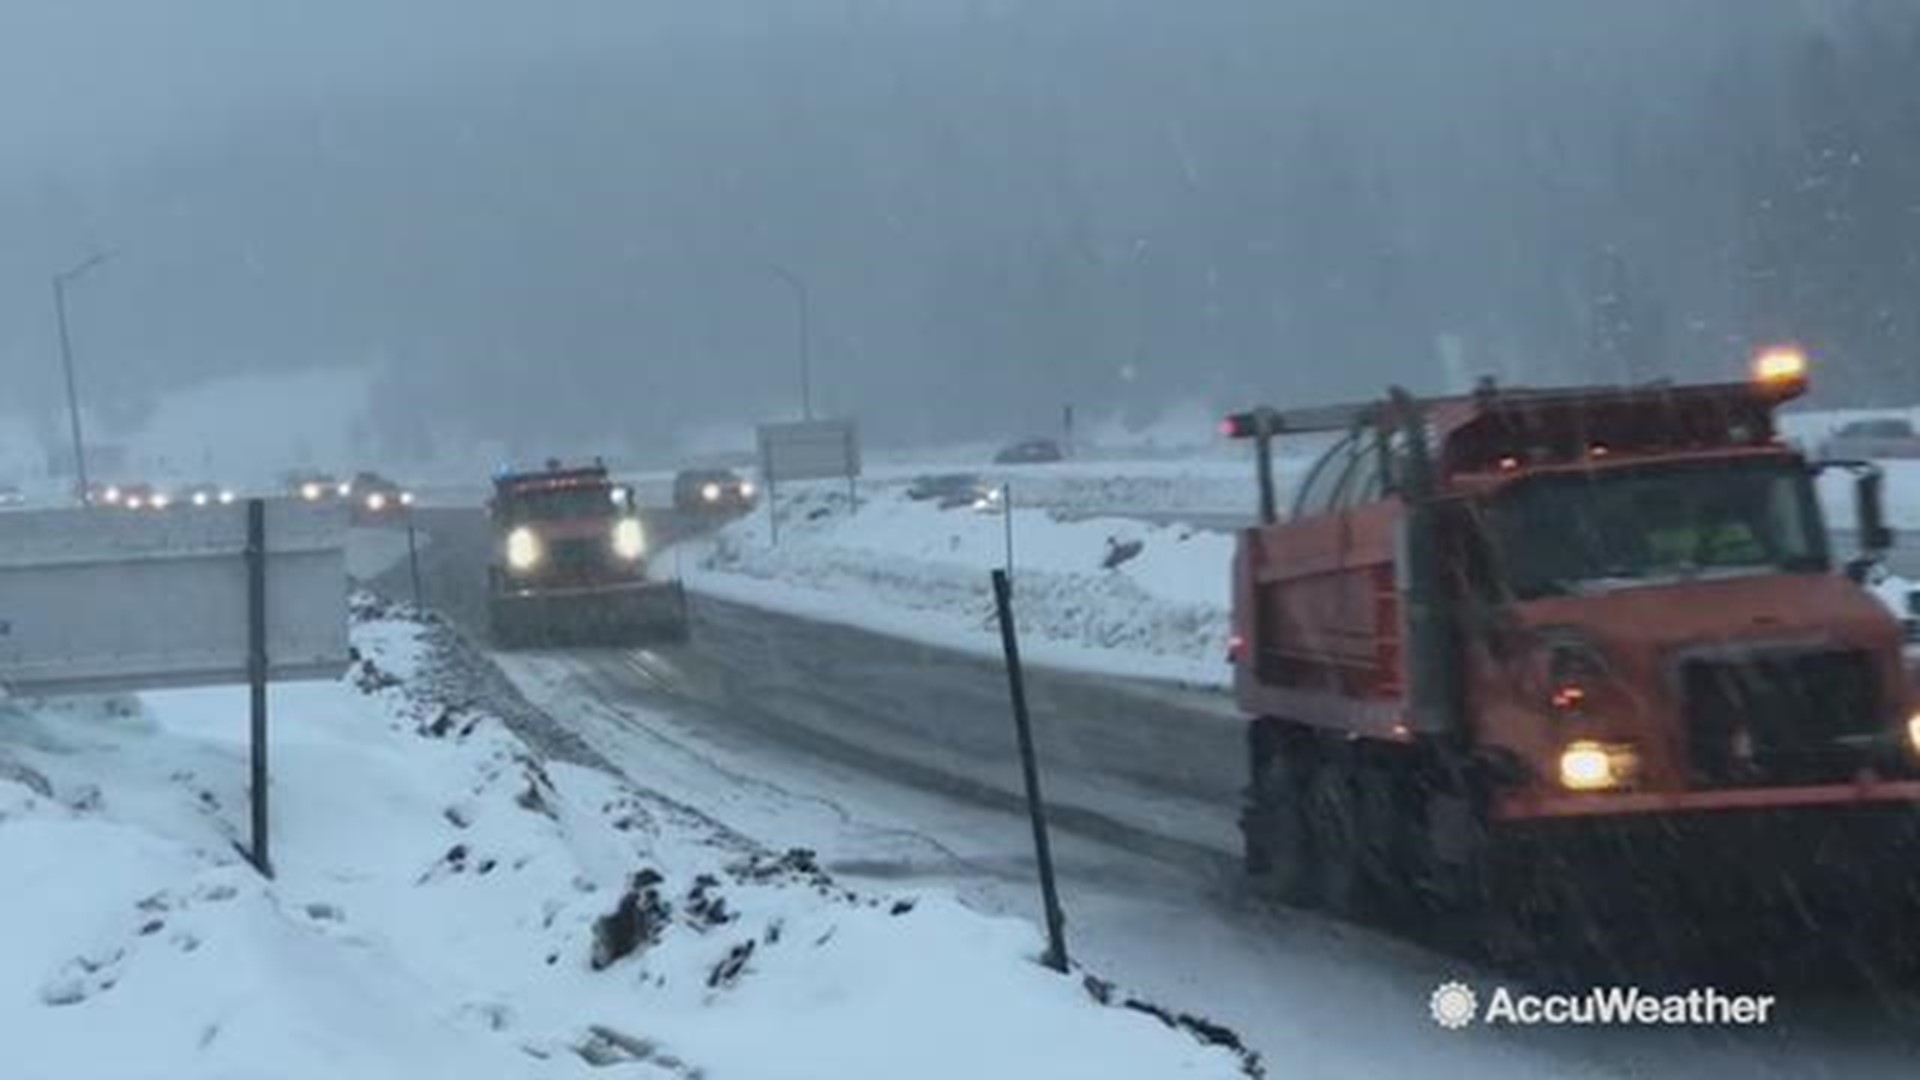 Vail Pass through Frisco, Colorado had snow squalls with 40-60 miles per hour on December 12th.